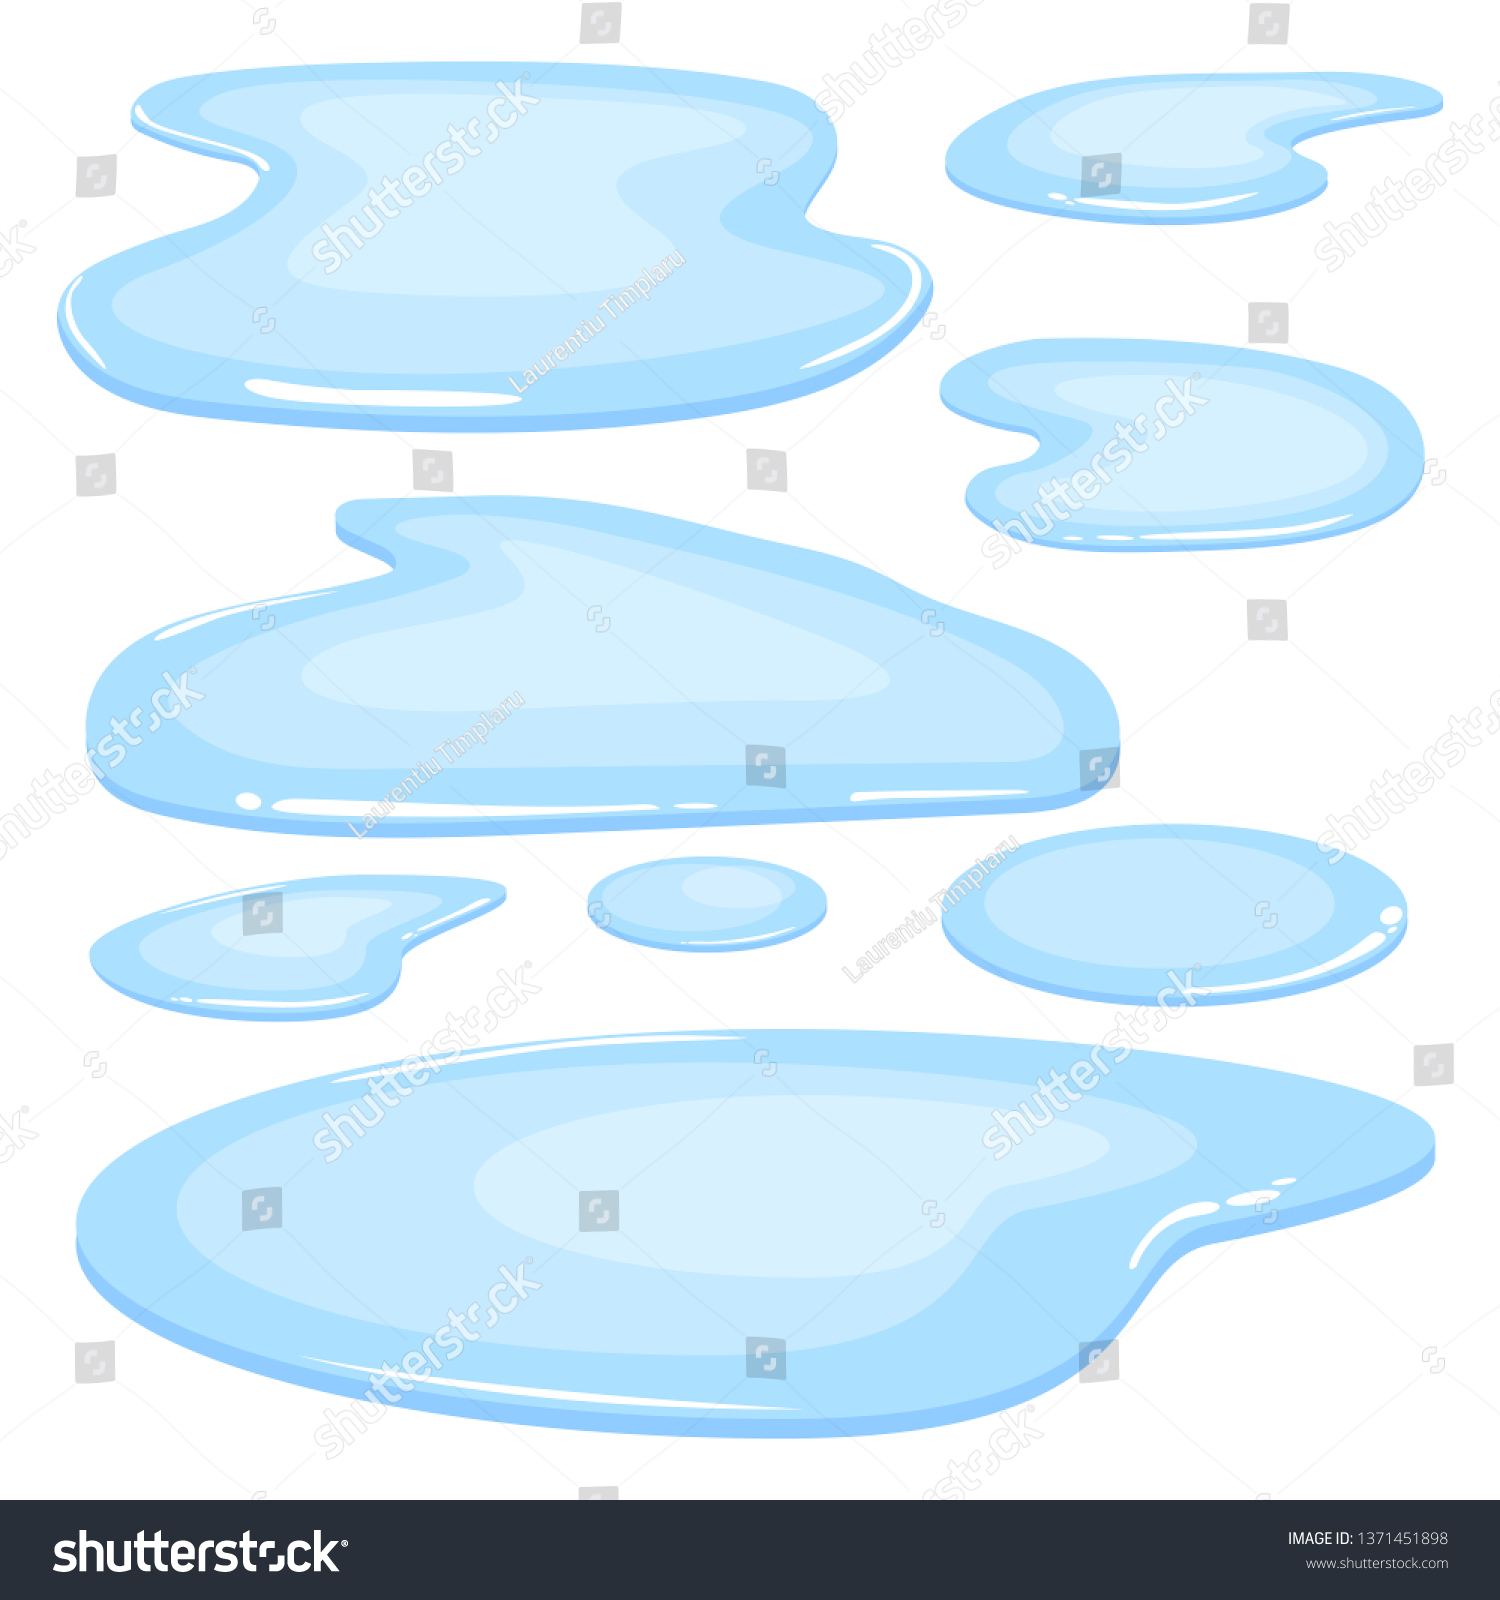 Water Puddle Vector Design Illustration Isolted Stock Vector